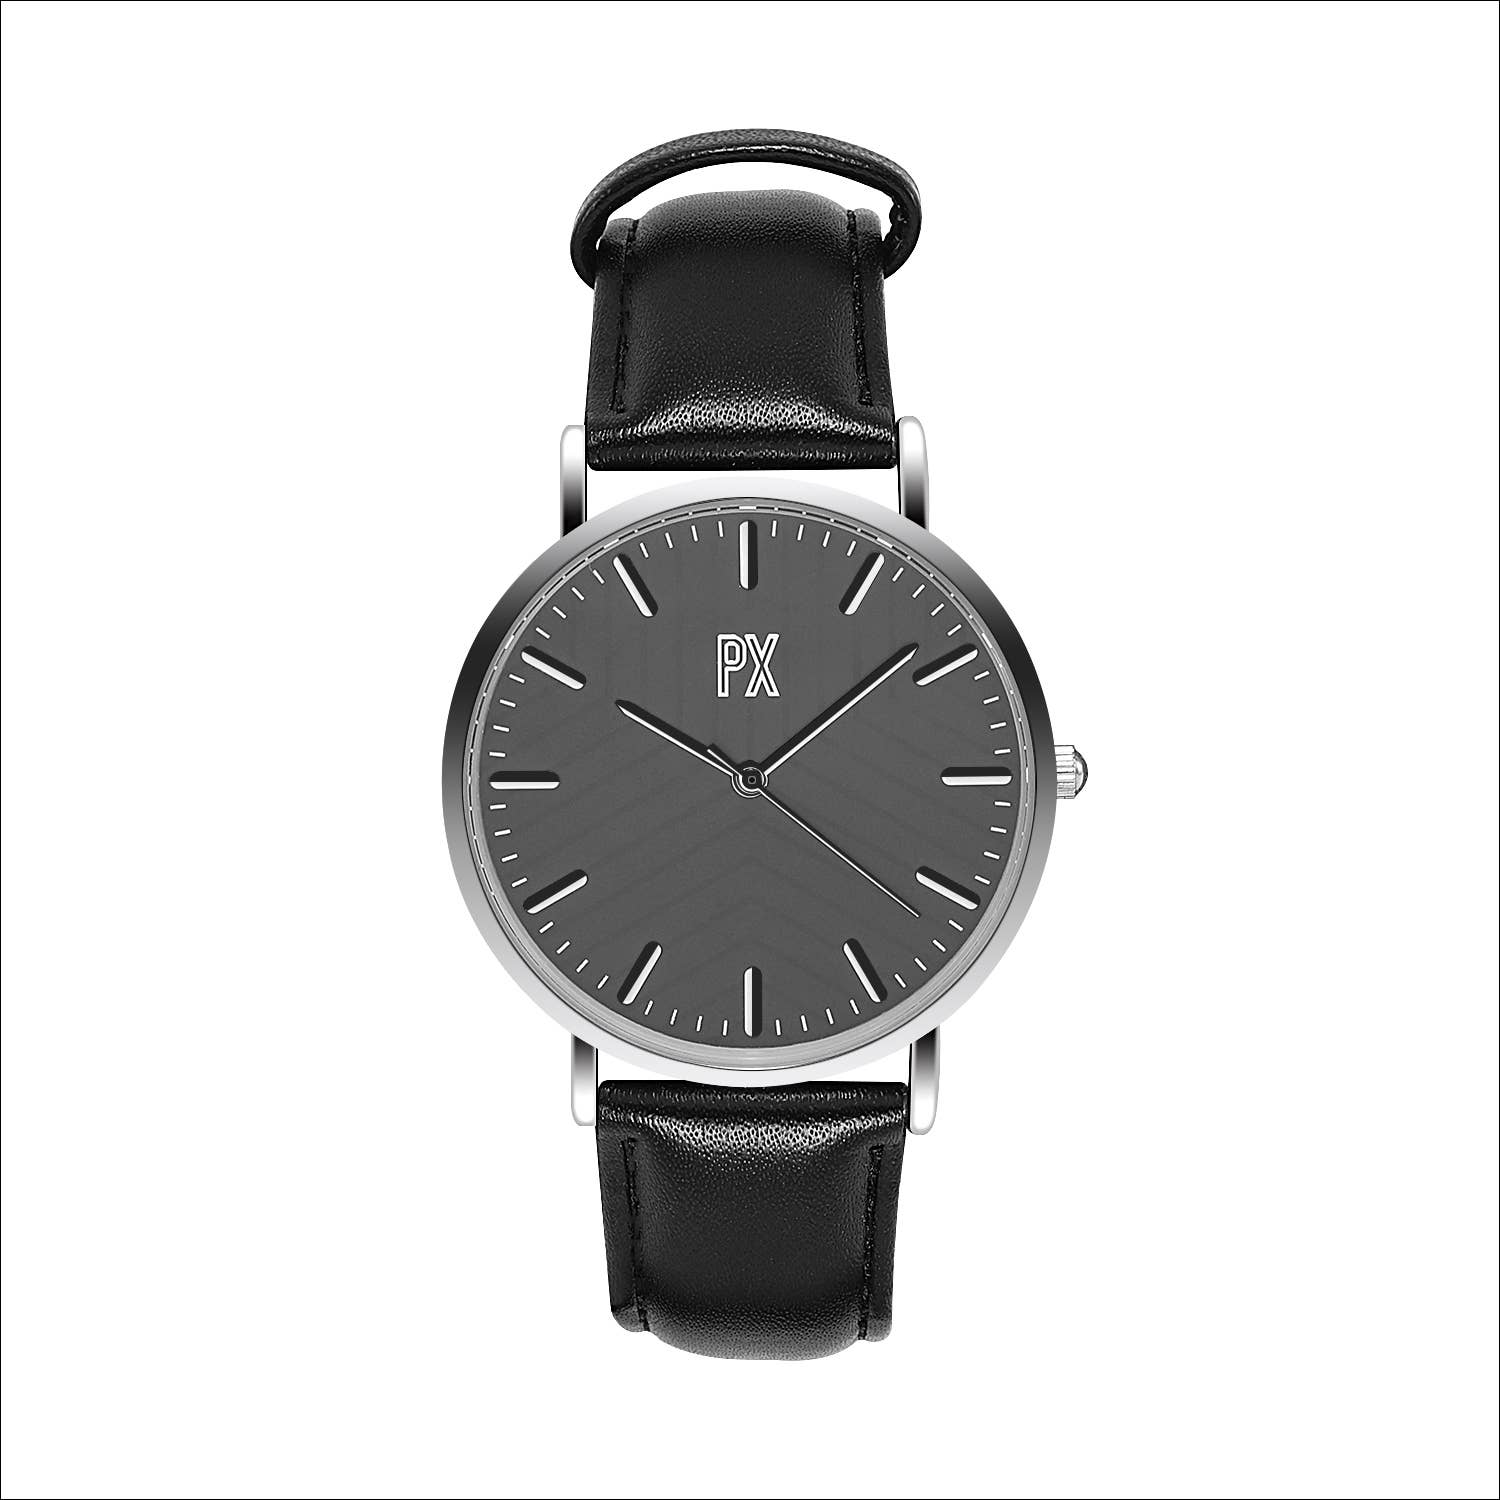 LIMITED QUANTITY - Terry Leather Strap Watch (2 colors)